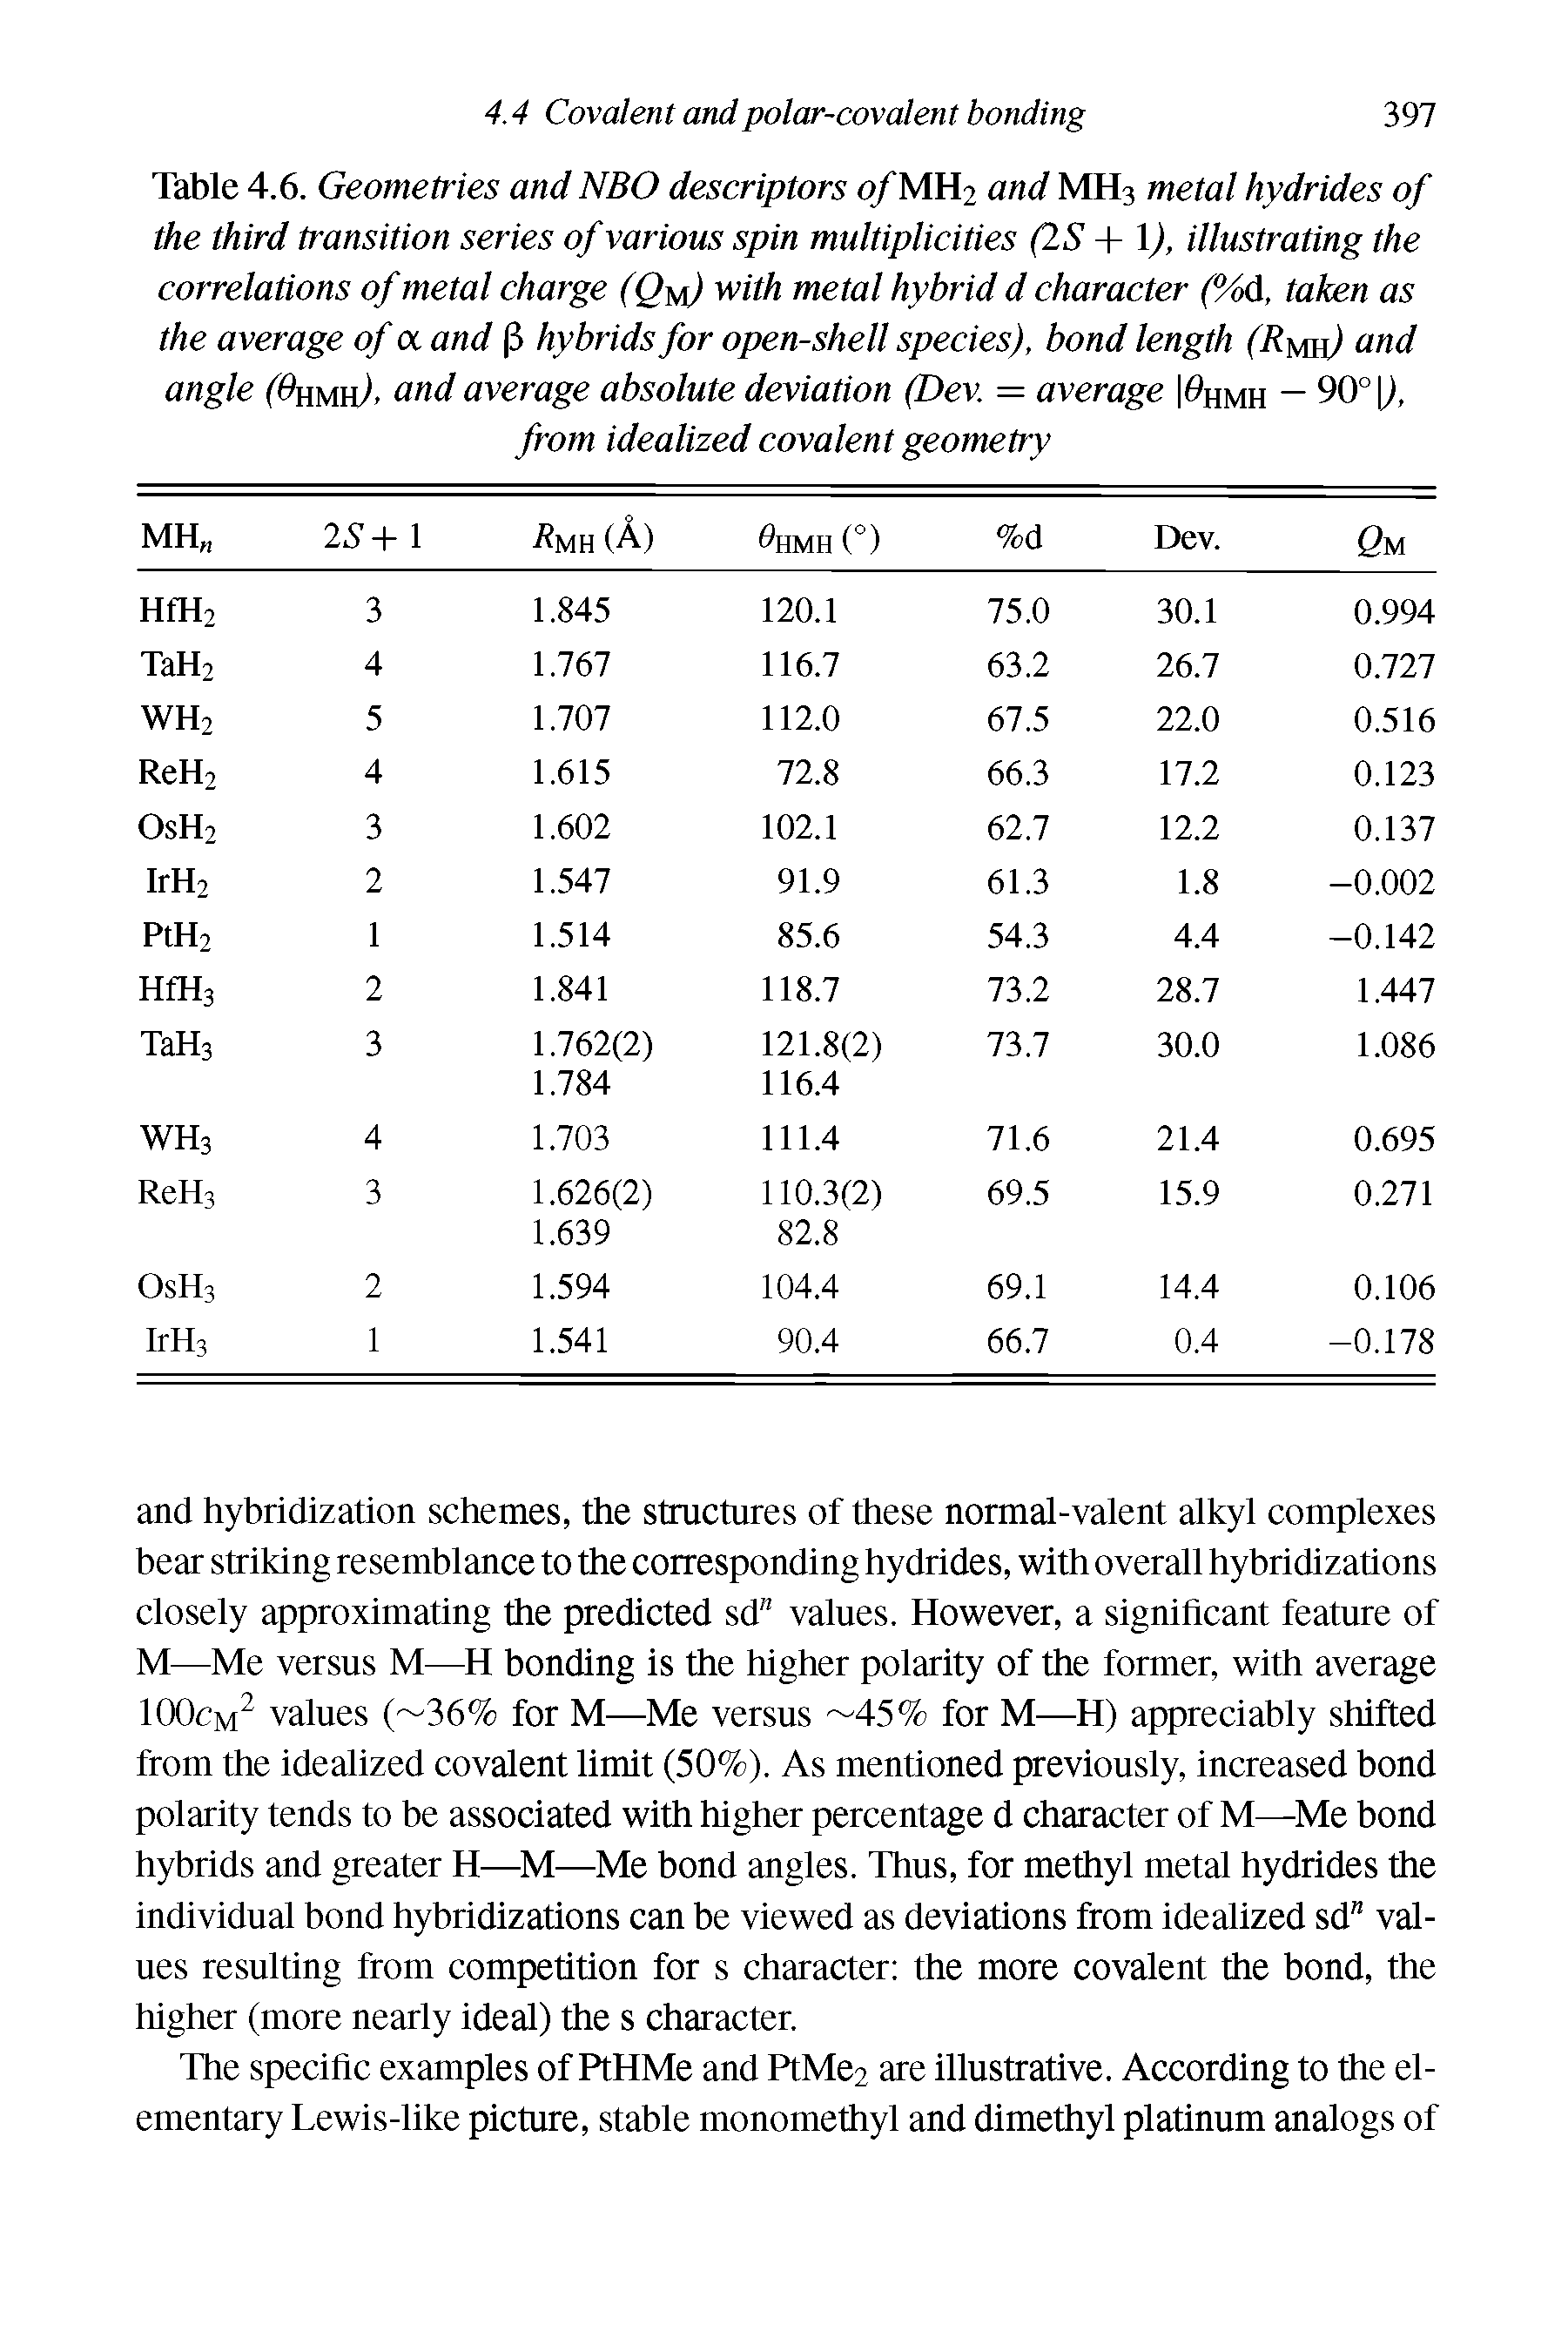 Table 4.6. Geometries and NBO descriptors 0/MH2 and MH3 metal hydrides of the third transition series of various spin multiplicities (IS + I), illustrating the correlations of metal charge (Qu) with metal hybrid d character (%d, taken as the average of a and 3 hybrids for open-shell species), bond length (Ruw) and angle (9hmh)> and average absolute deviation (Dev. = average %mh — 90" ), from idealized covalent geometry...